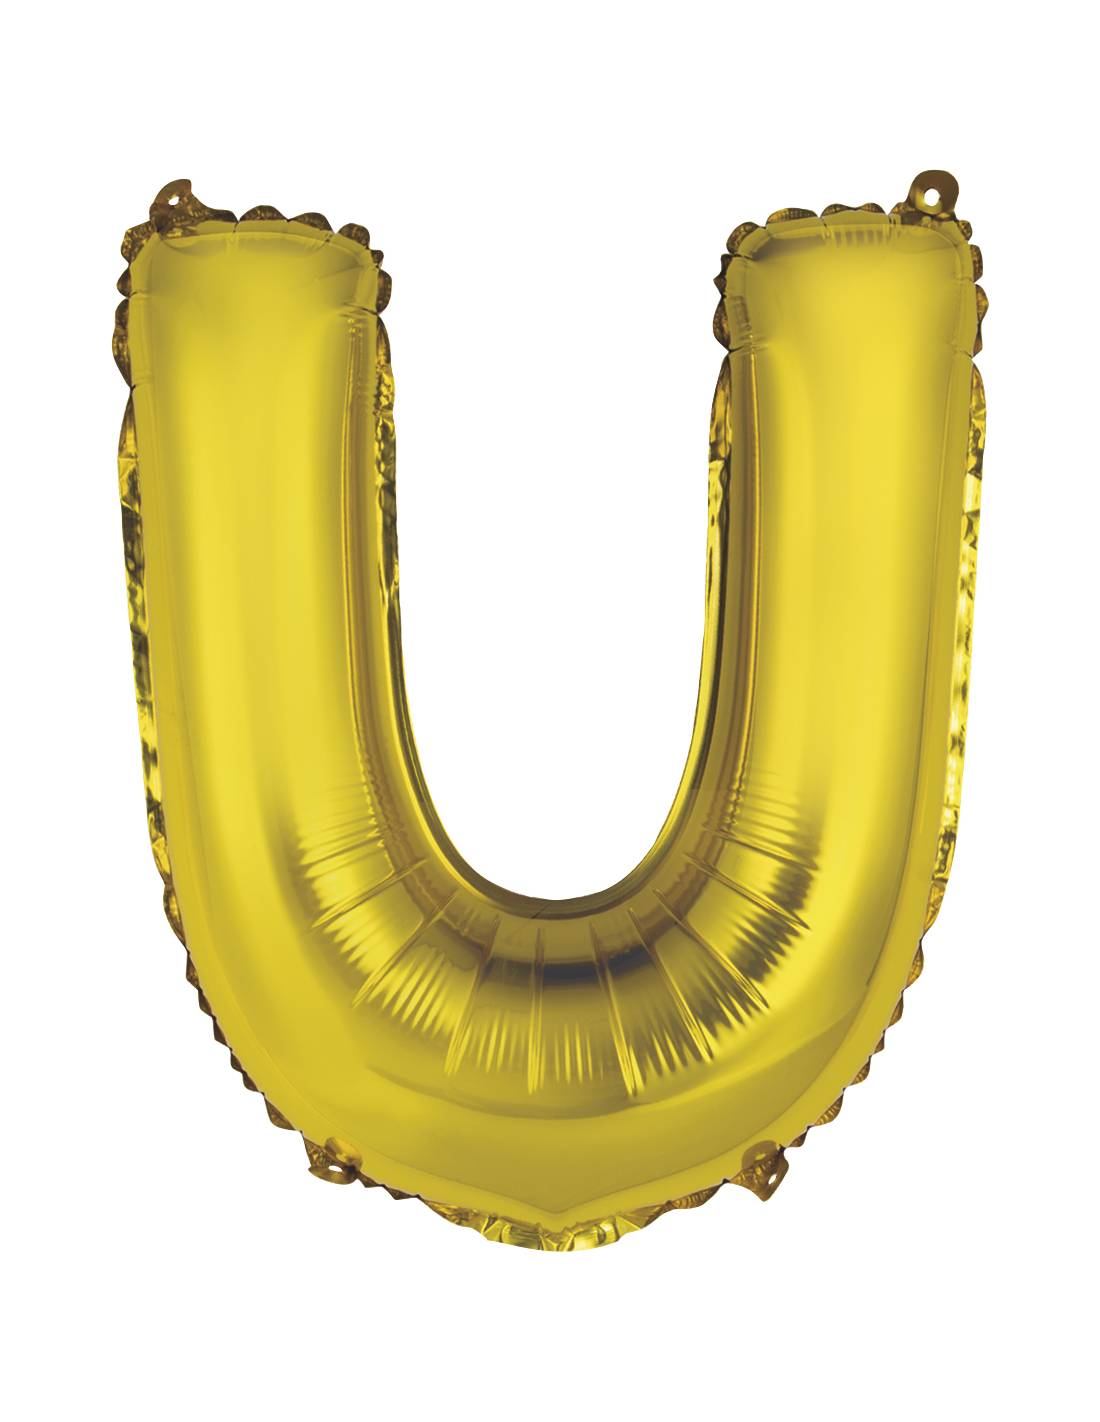 “U” Gold letter air filled balloon